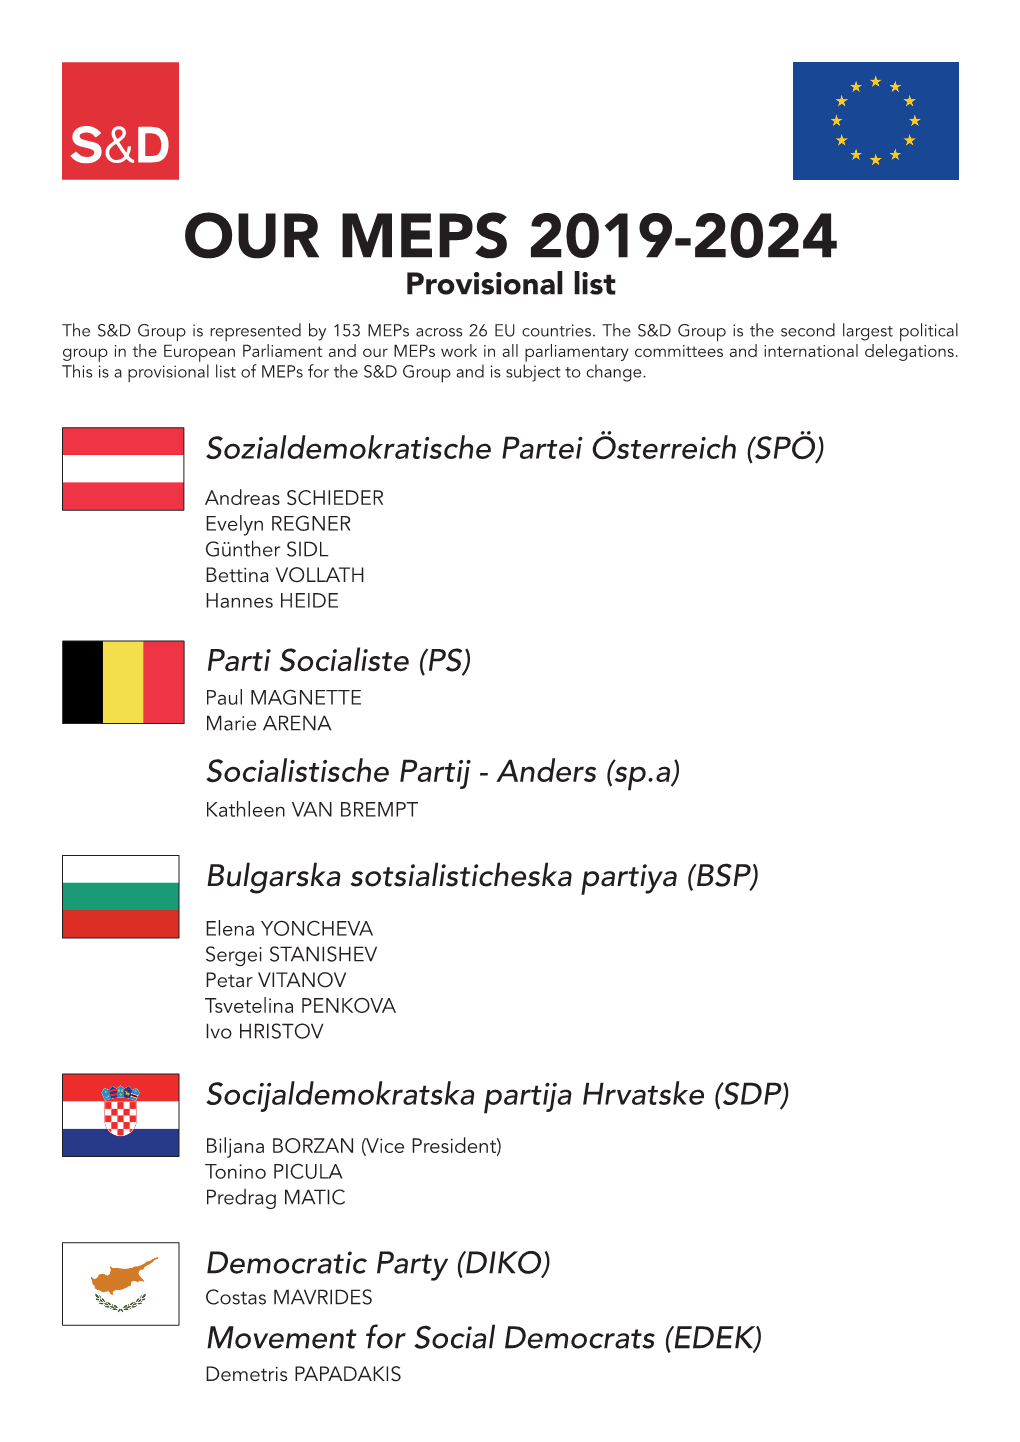 OUR MEPS 2019-2024 Provisional List the S&D Group Is Represented by 153 Meps Across 26 EU Countries